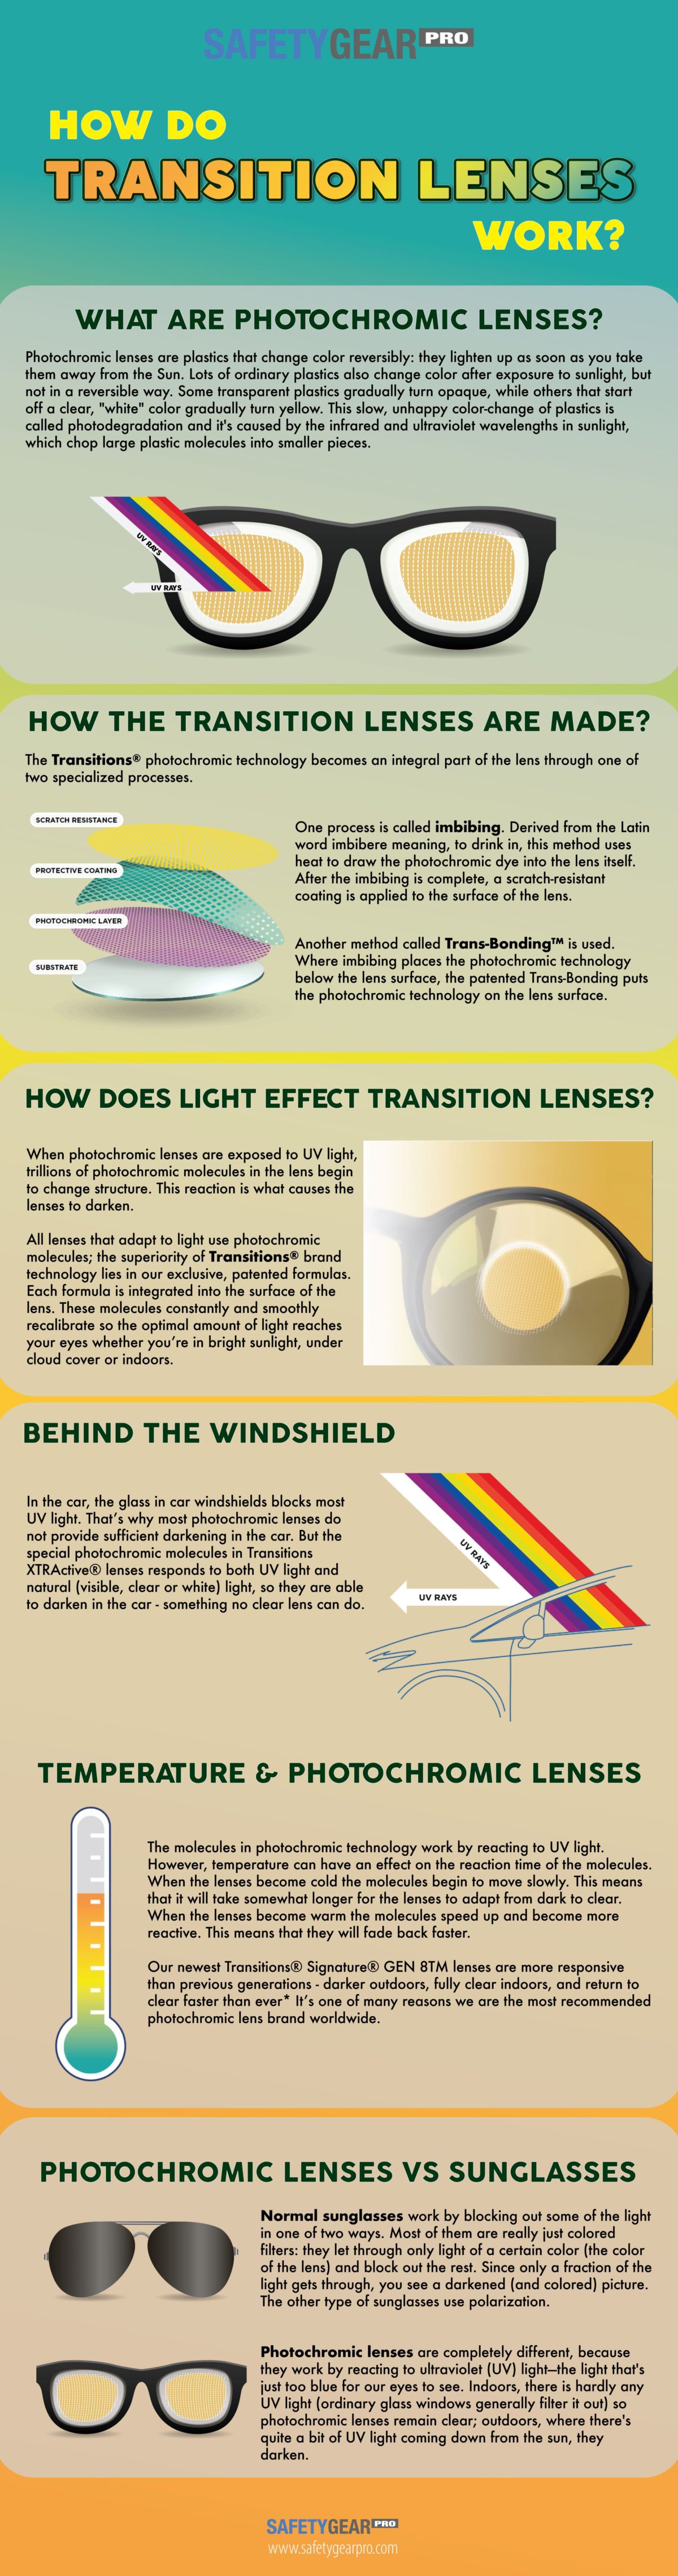 How Photochromic Transition Lenses Work | Safety Gear Pro